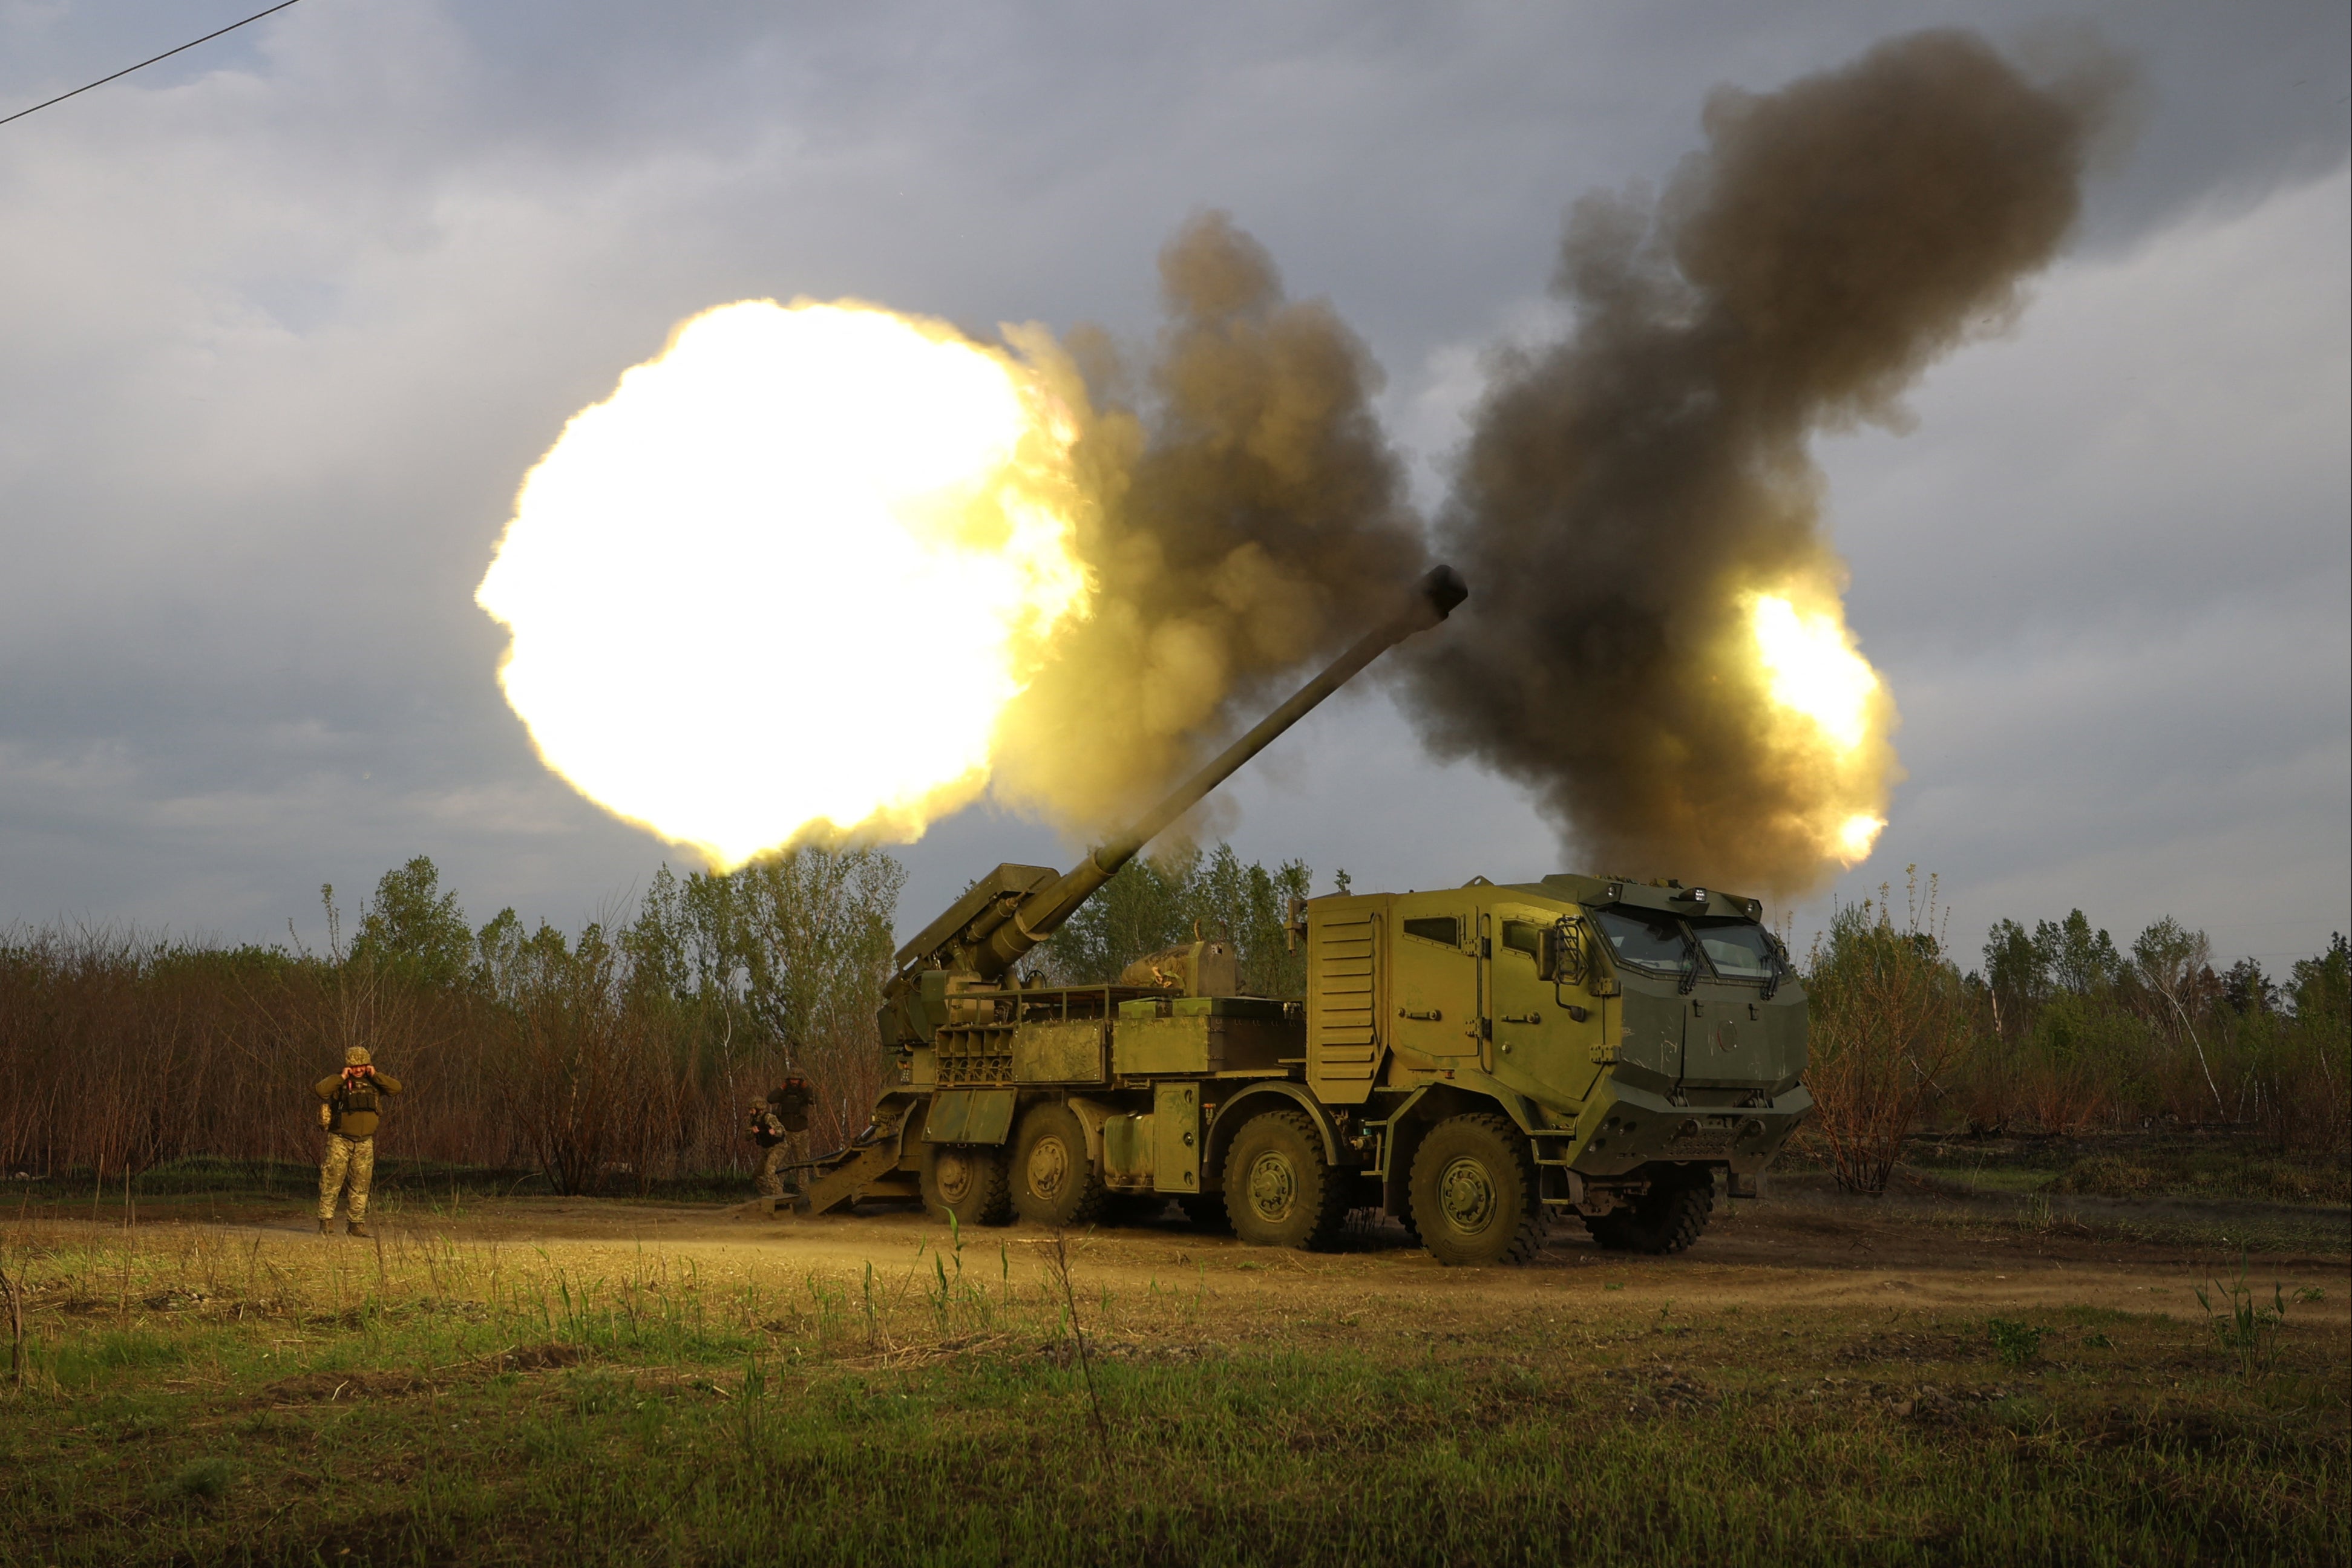 Gunners from 43rd Separate Mechanized Brigade of the Armed Forces of Ukraine fire at Russian positions in Kharkiv